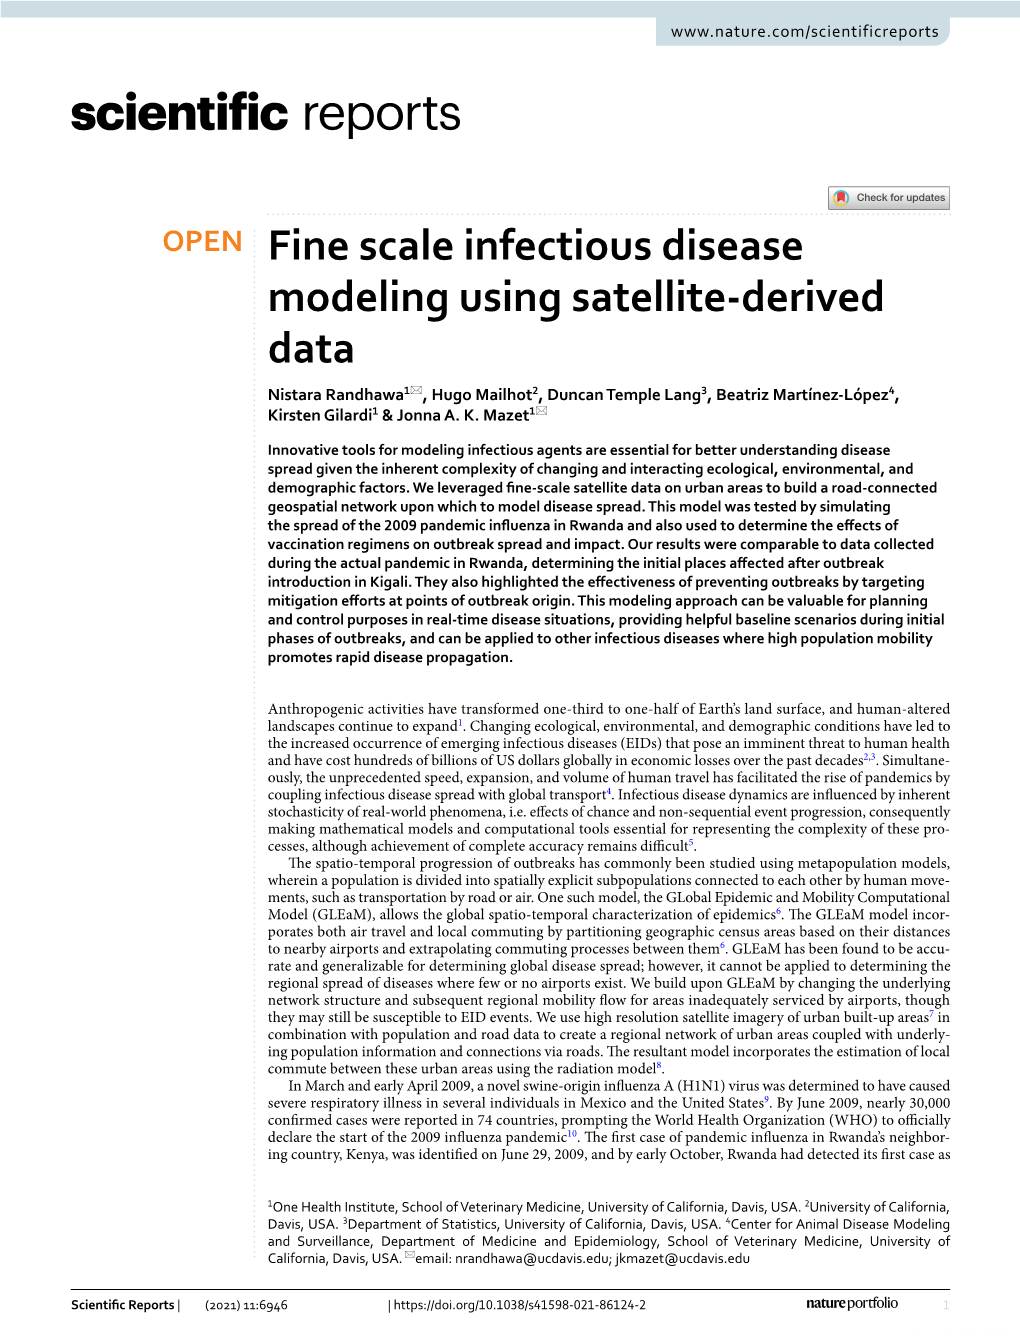 Fine Scale Infectious Disease Modeling Using Satellite-Derived Data